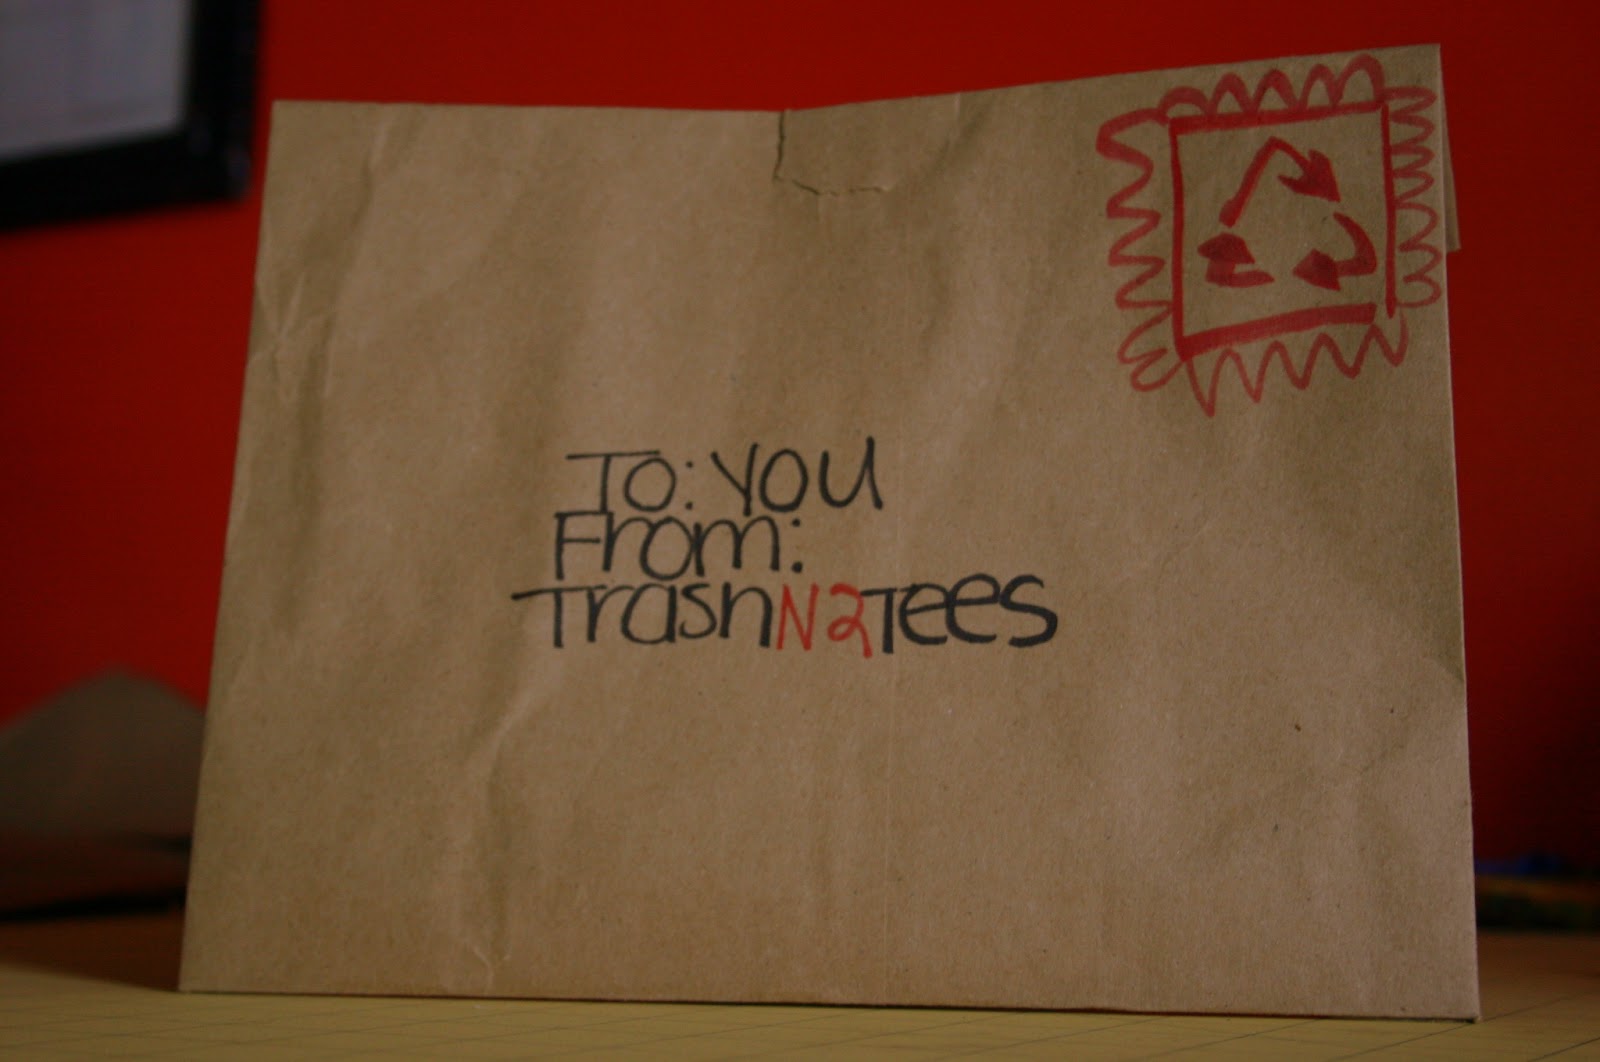 And There You Have Your Repurposed Brown Paper Bag Envelope Using The